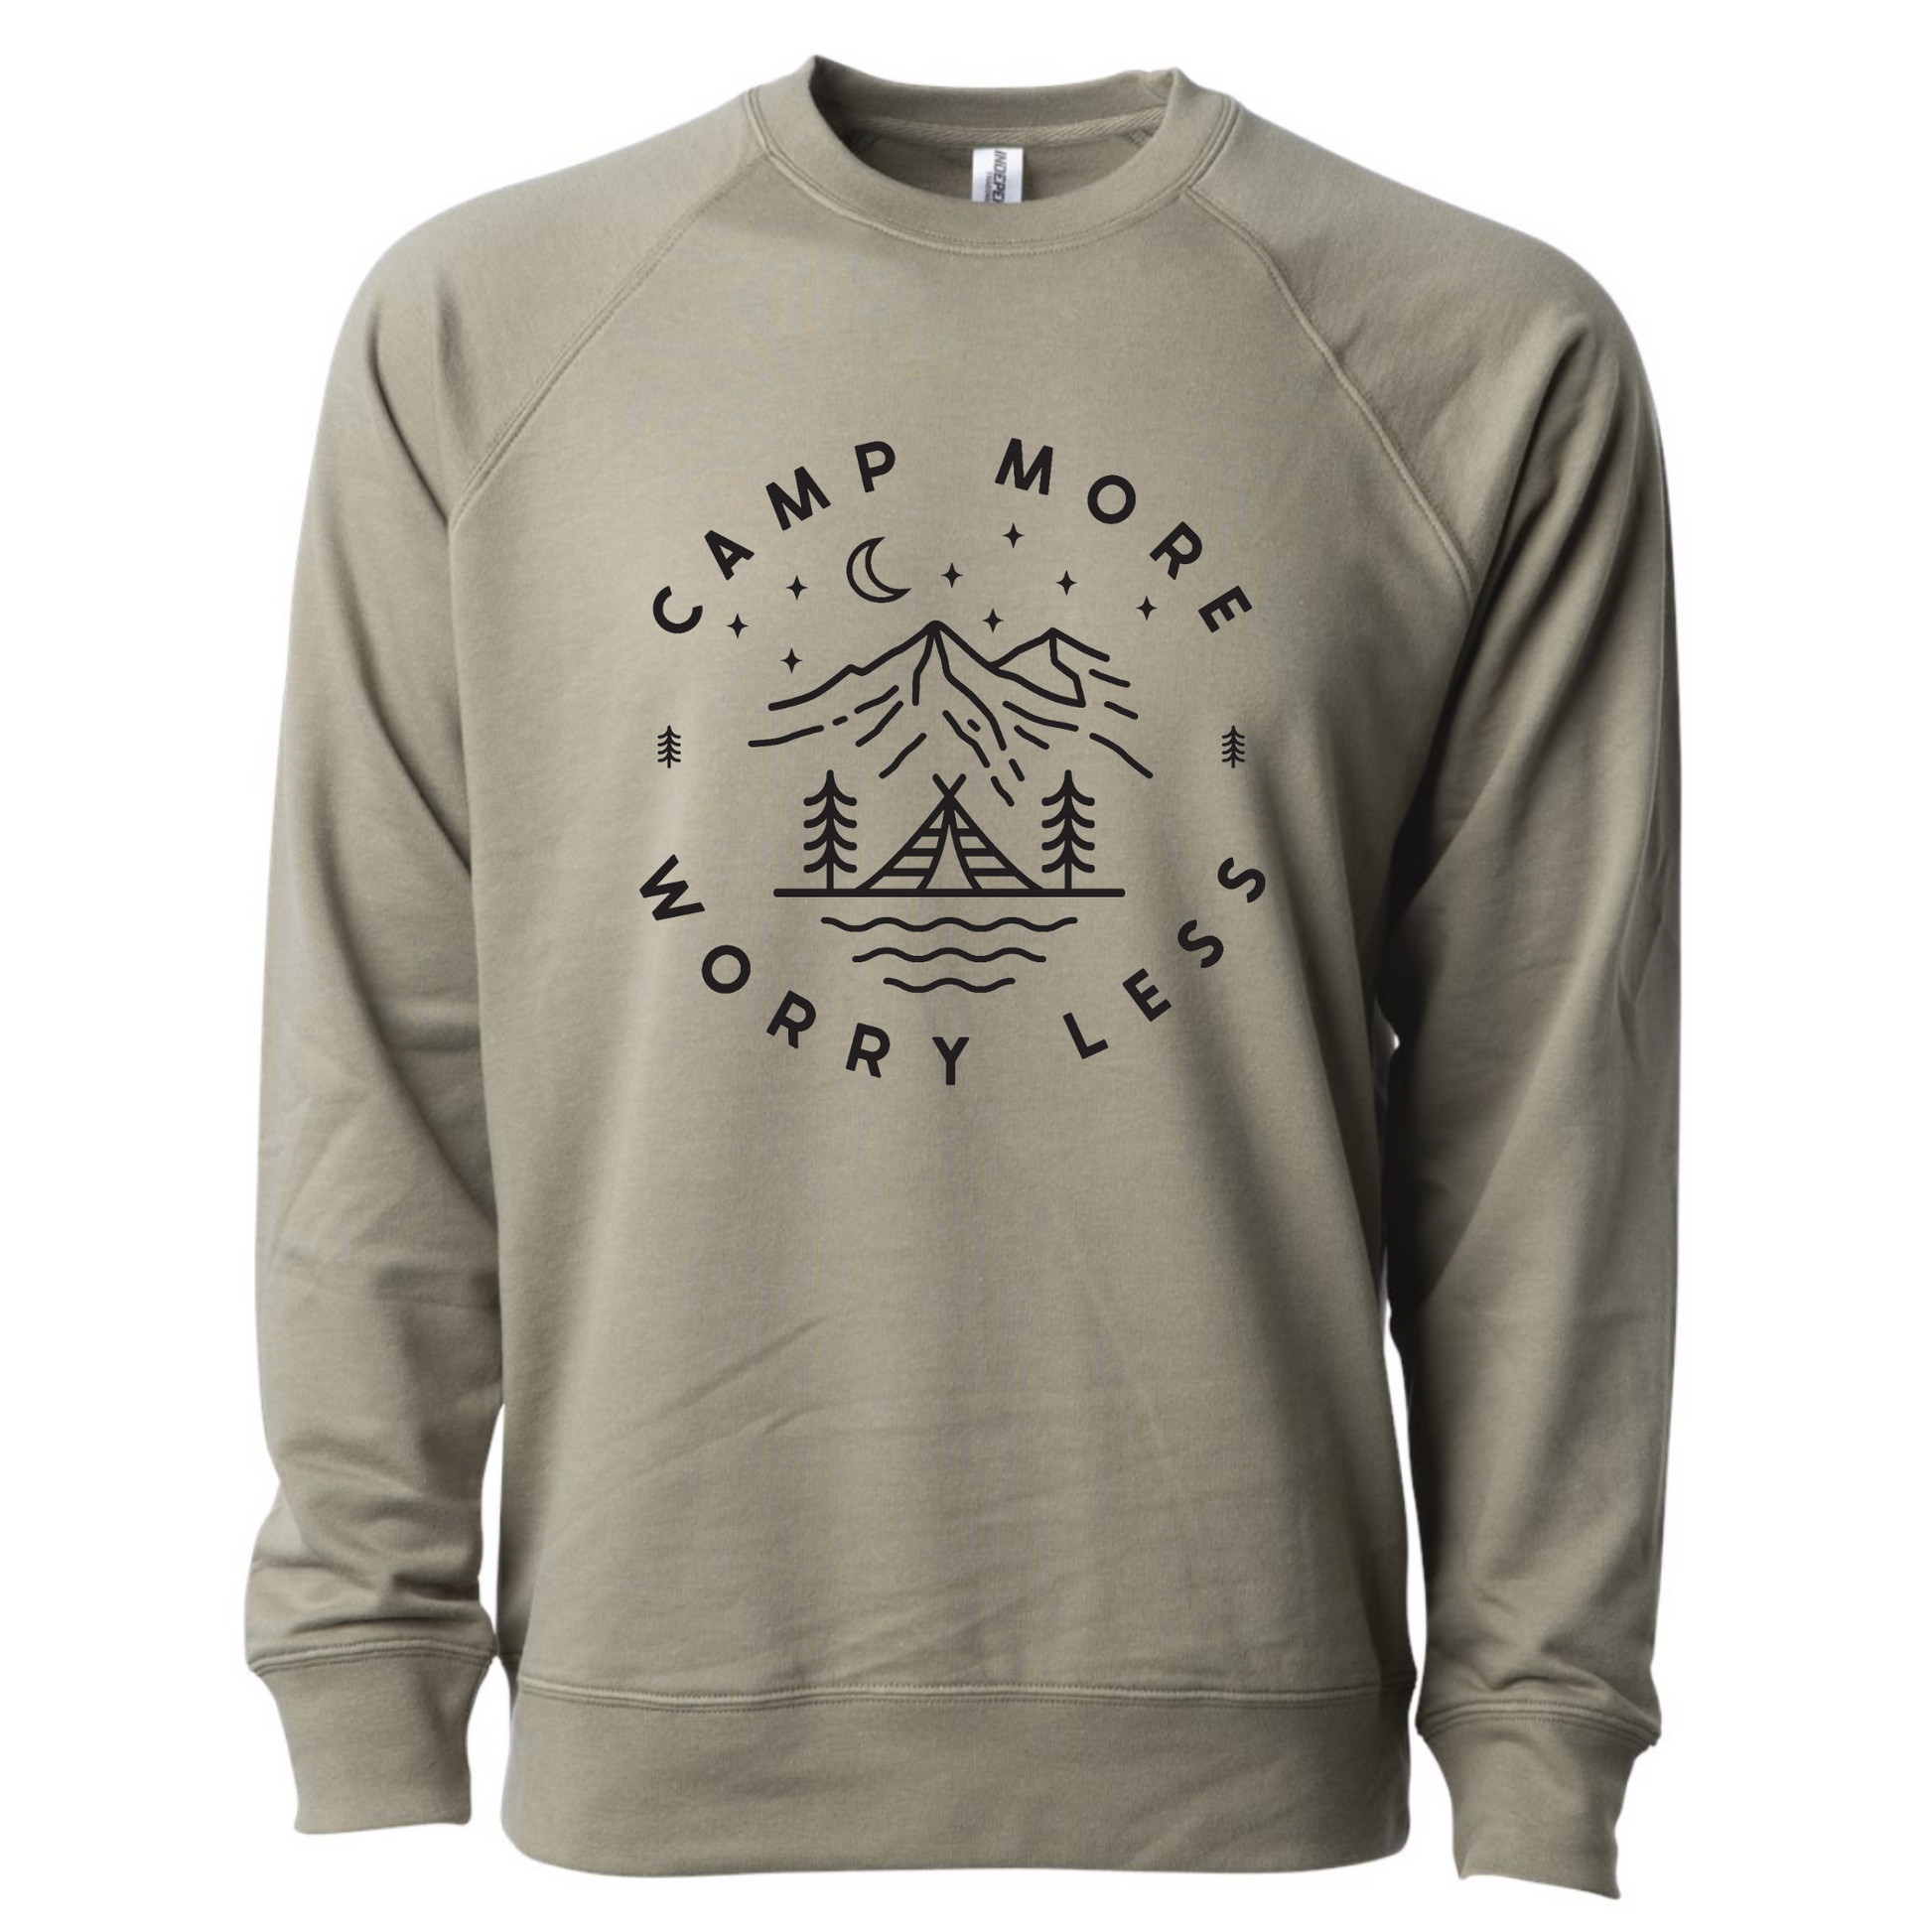 Camp More Worry Less - Pull Over Sweatshirt. Design has "camp more" on top & "worry less" on the bottom curved in a circle with small pine trees separating the words. In the middle includes a tent siting on a bay of water with pine trees standing on both sides of the tent, with mountains in the background and stars aligning with a moon above the mountains. The design is in black on an olive green blank. This is the front view of the sweatshirt.